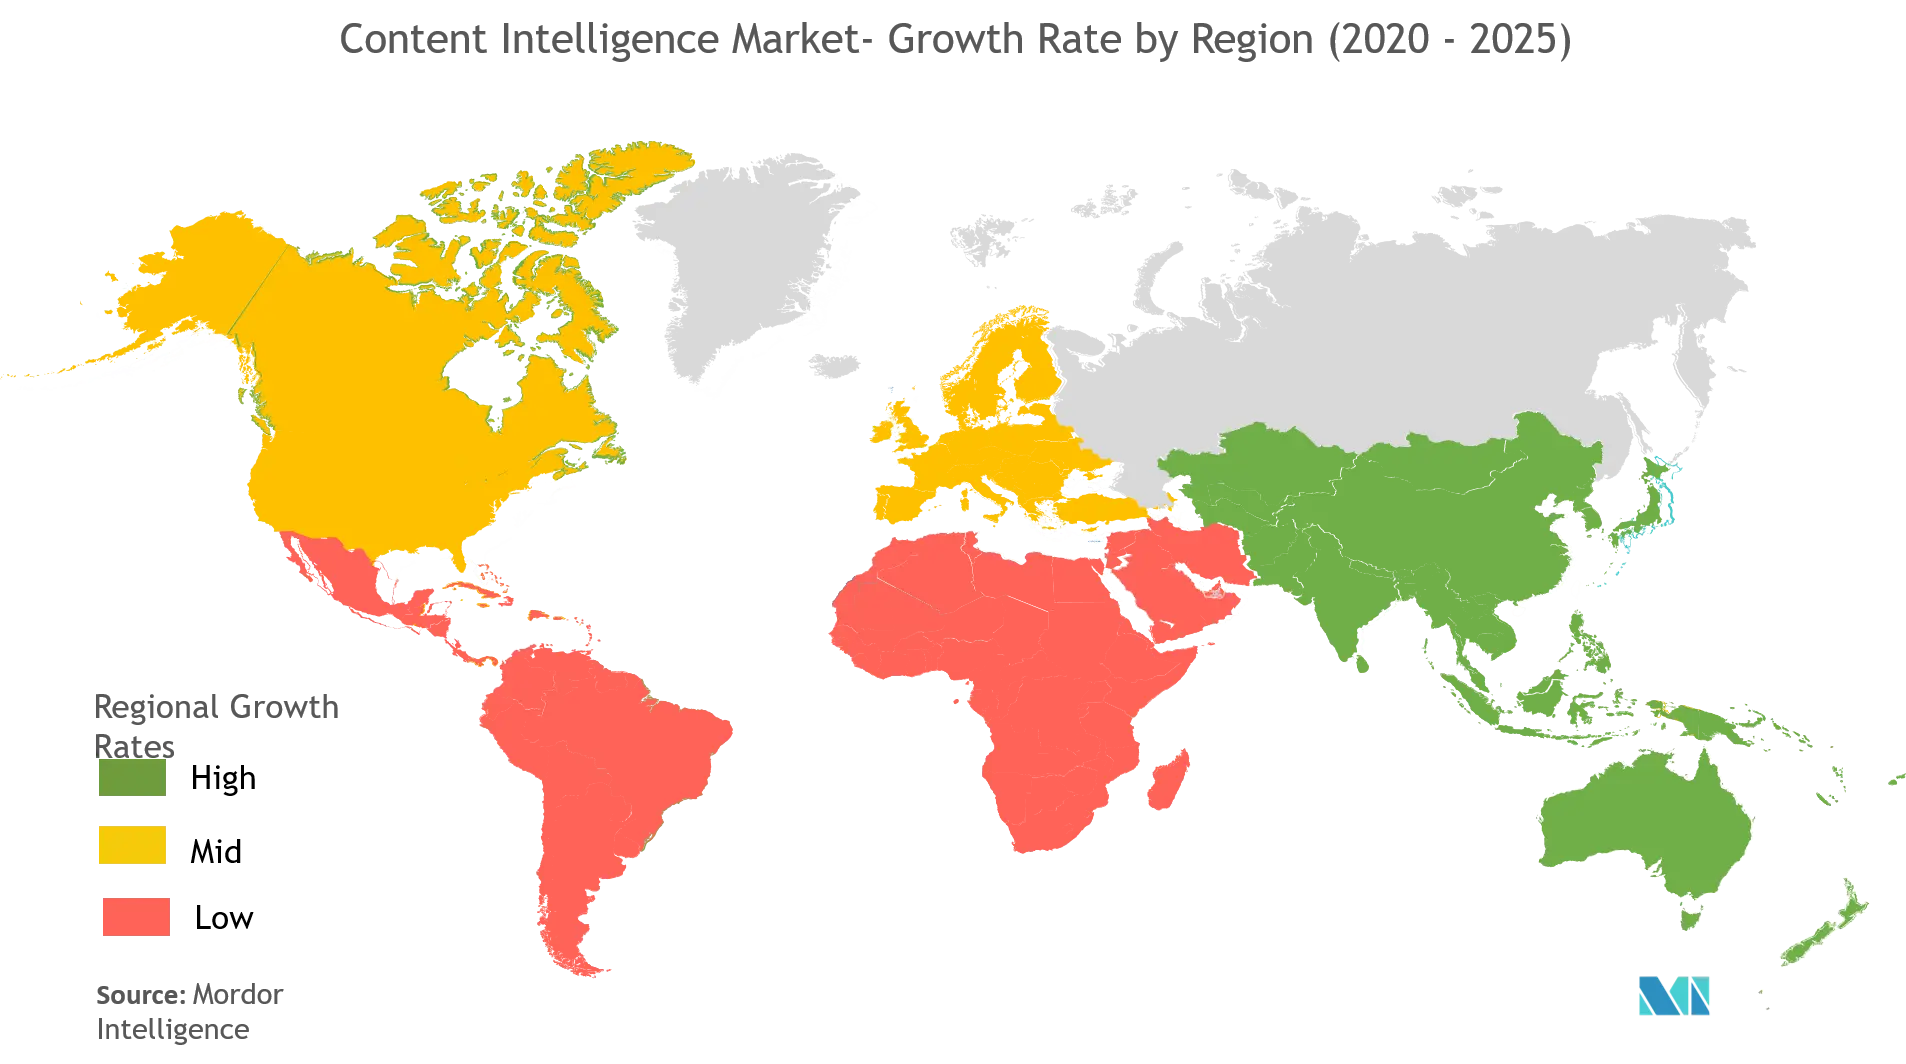 Content Intelligence Market : Growth Rate by Region (2020-2025)